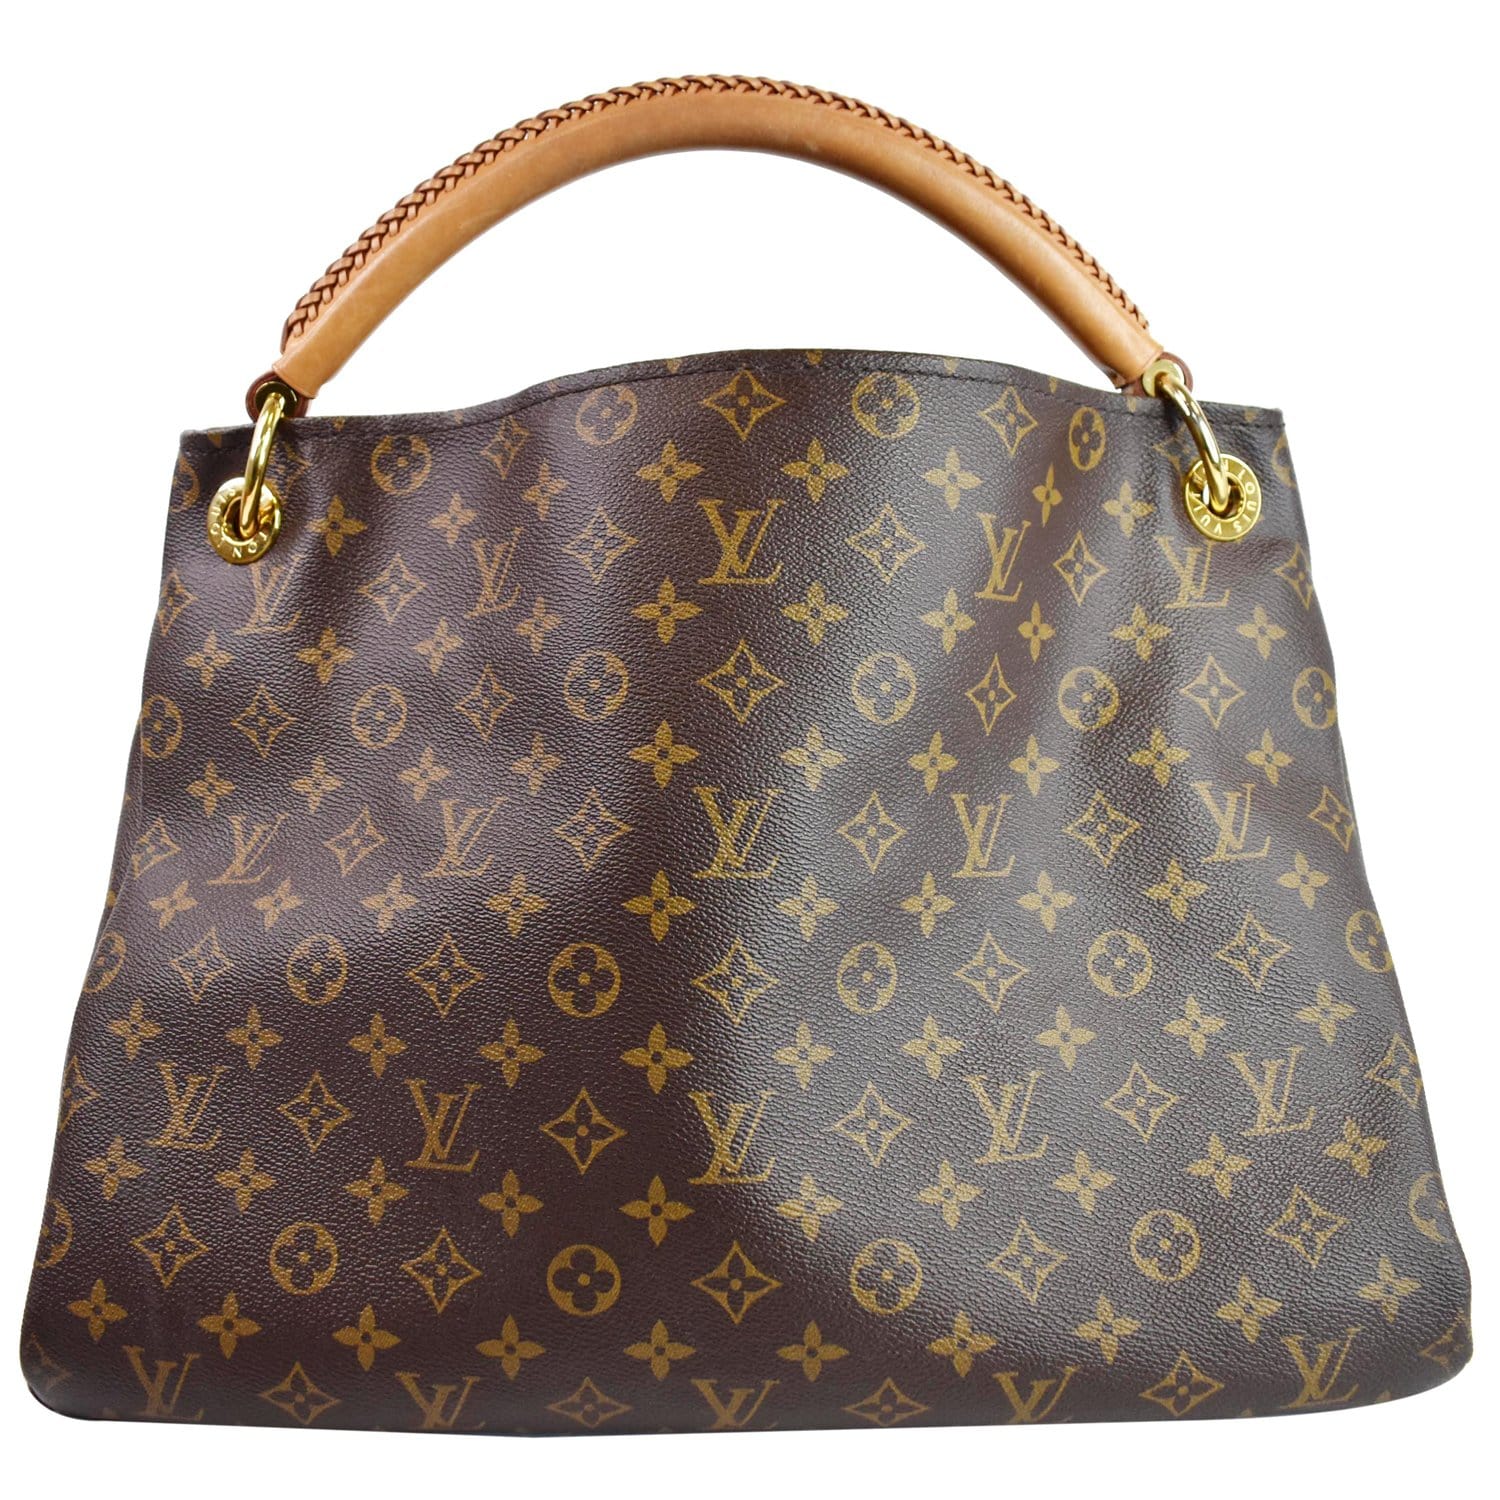 used Women Pre-owned Authenticated Louis Vuitton Mahina on My Side mm Calf Leather Brown Satchel, Women's, Size: Small